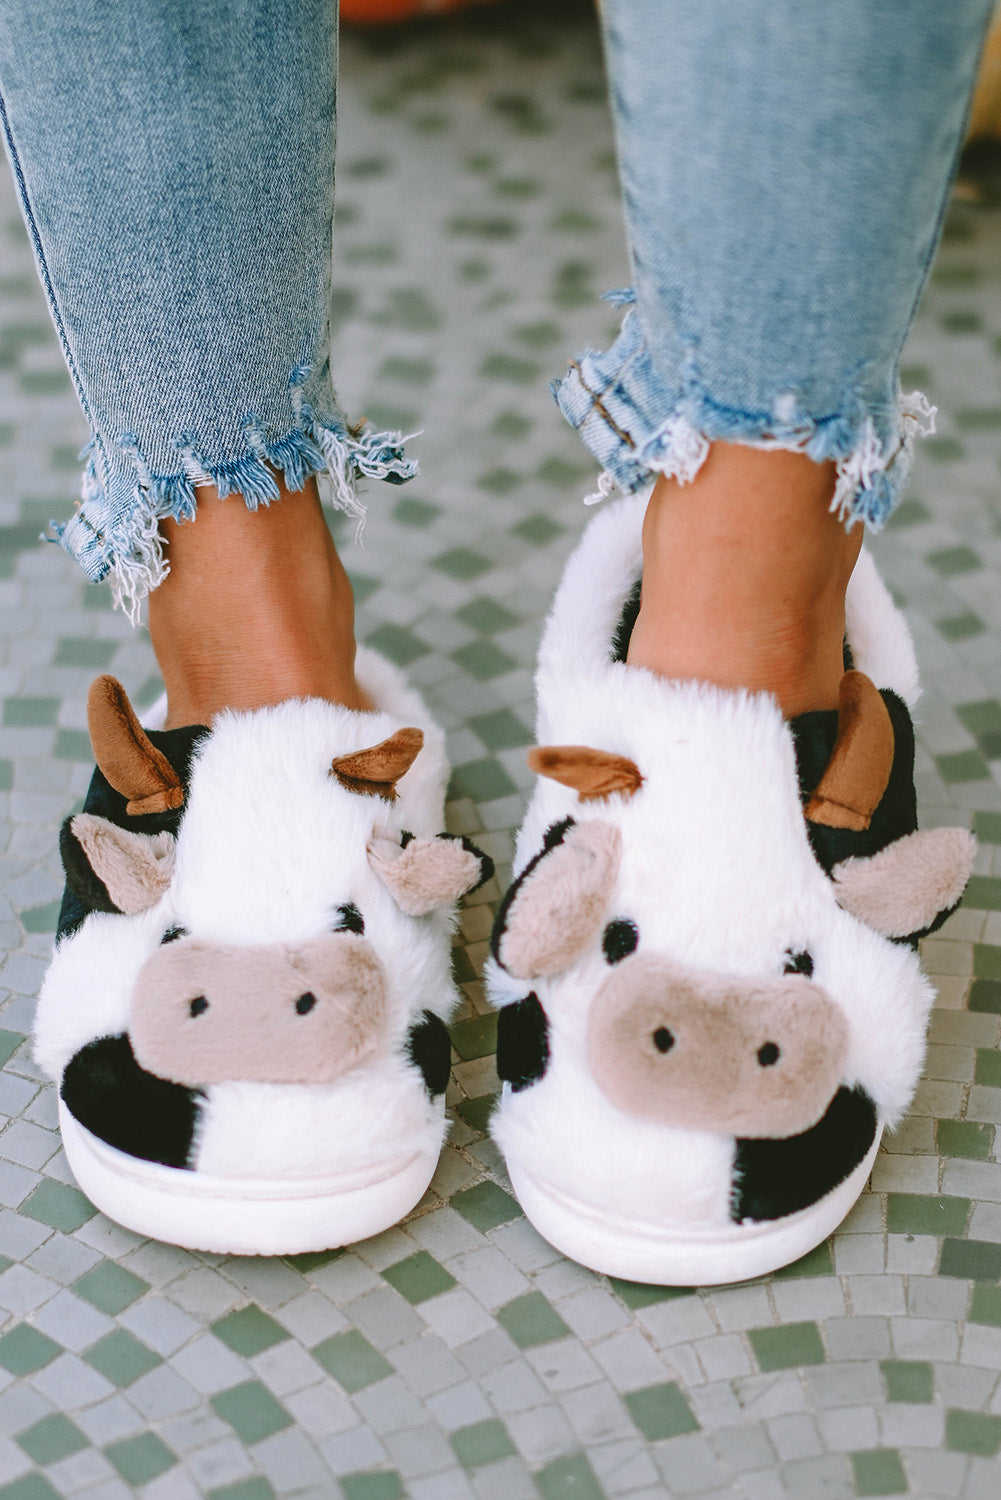 Moo-arvoulous Slippers